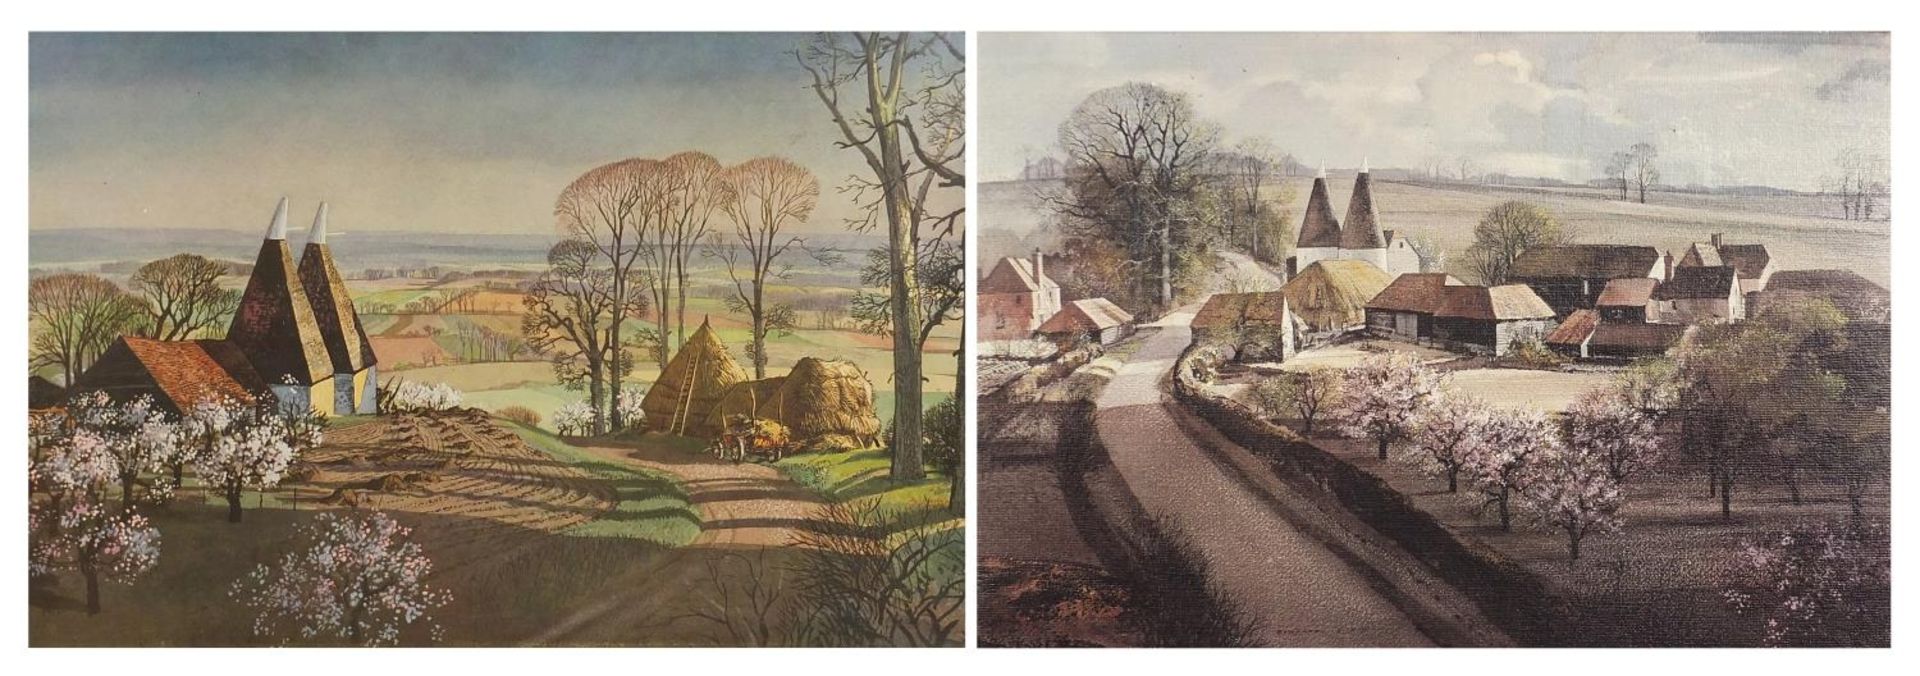 Rowland Hilder - Garden of England and one other, two vintage prints in colour, mounted and